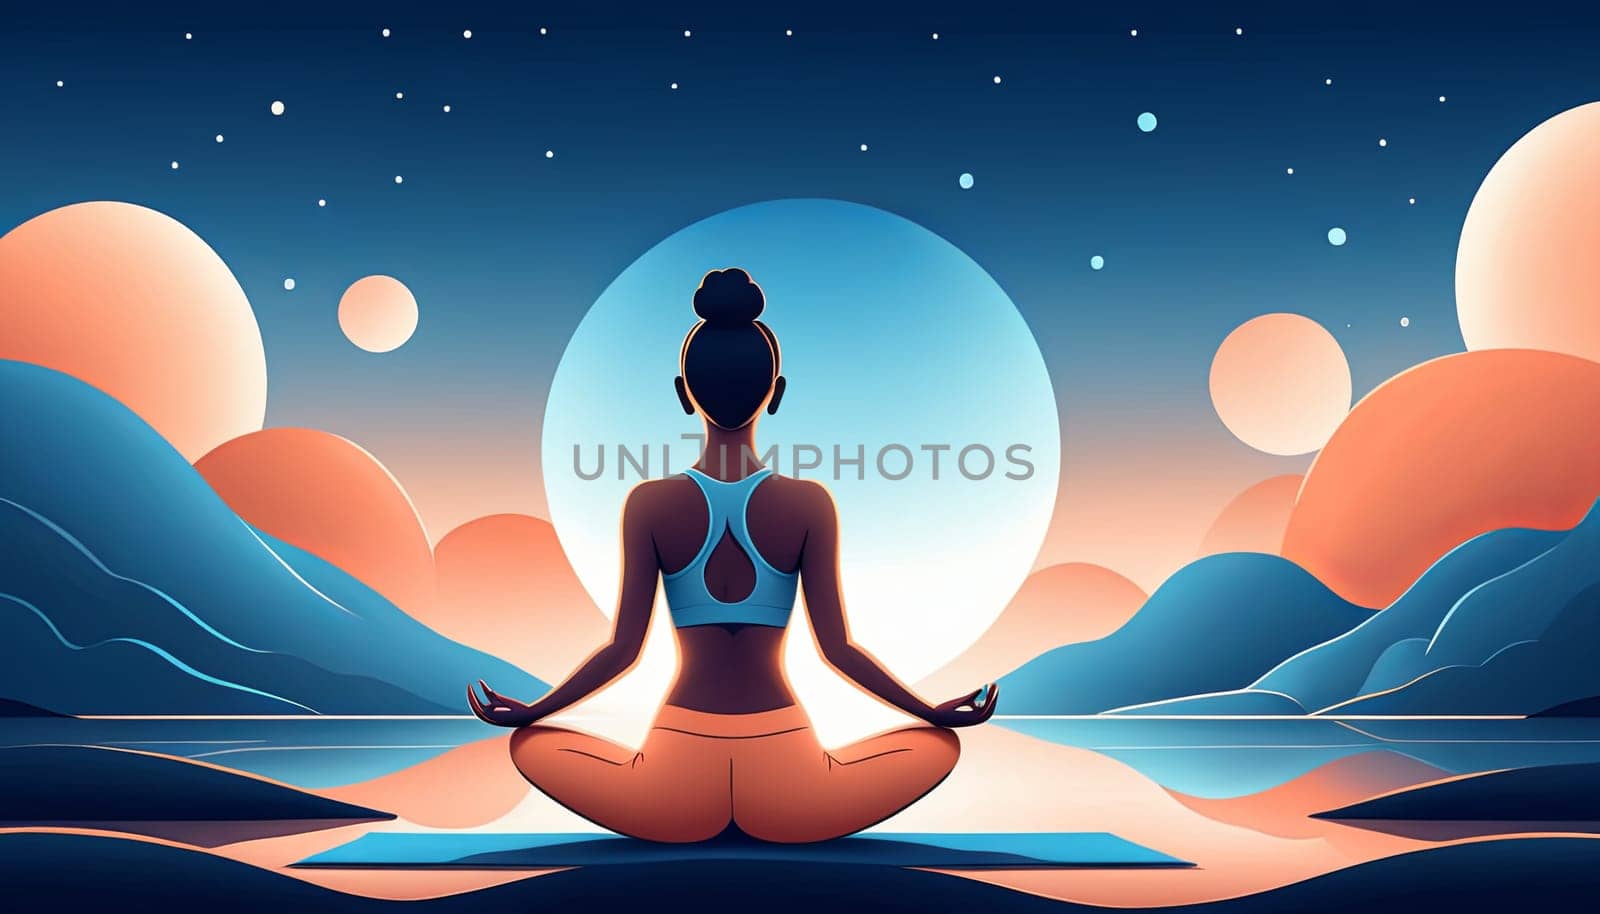 A woman in a lotus yoga asana, seen from the back, practicing relaxation and meditation. Peach and blue hues dominate the scene. Represents peaceful nighttime meditation for relaxation. by Matiunina